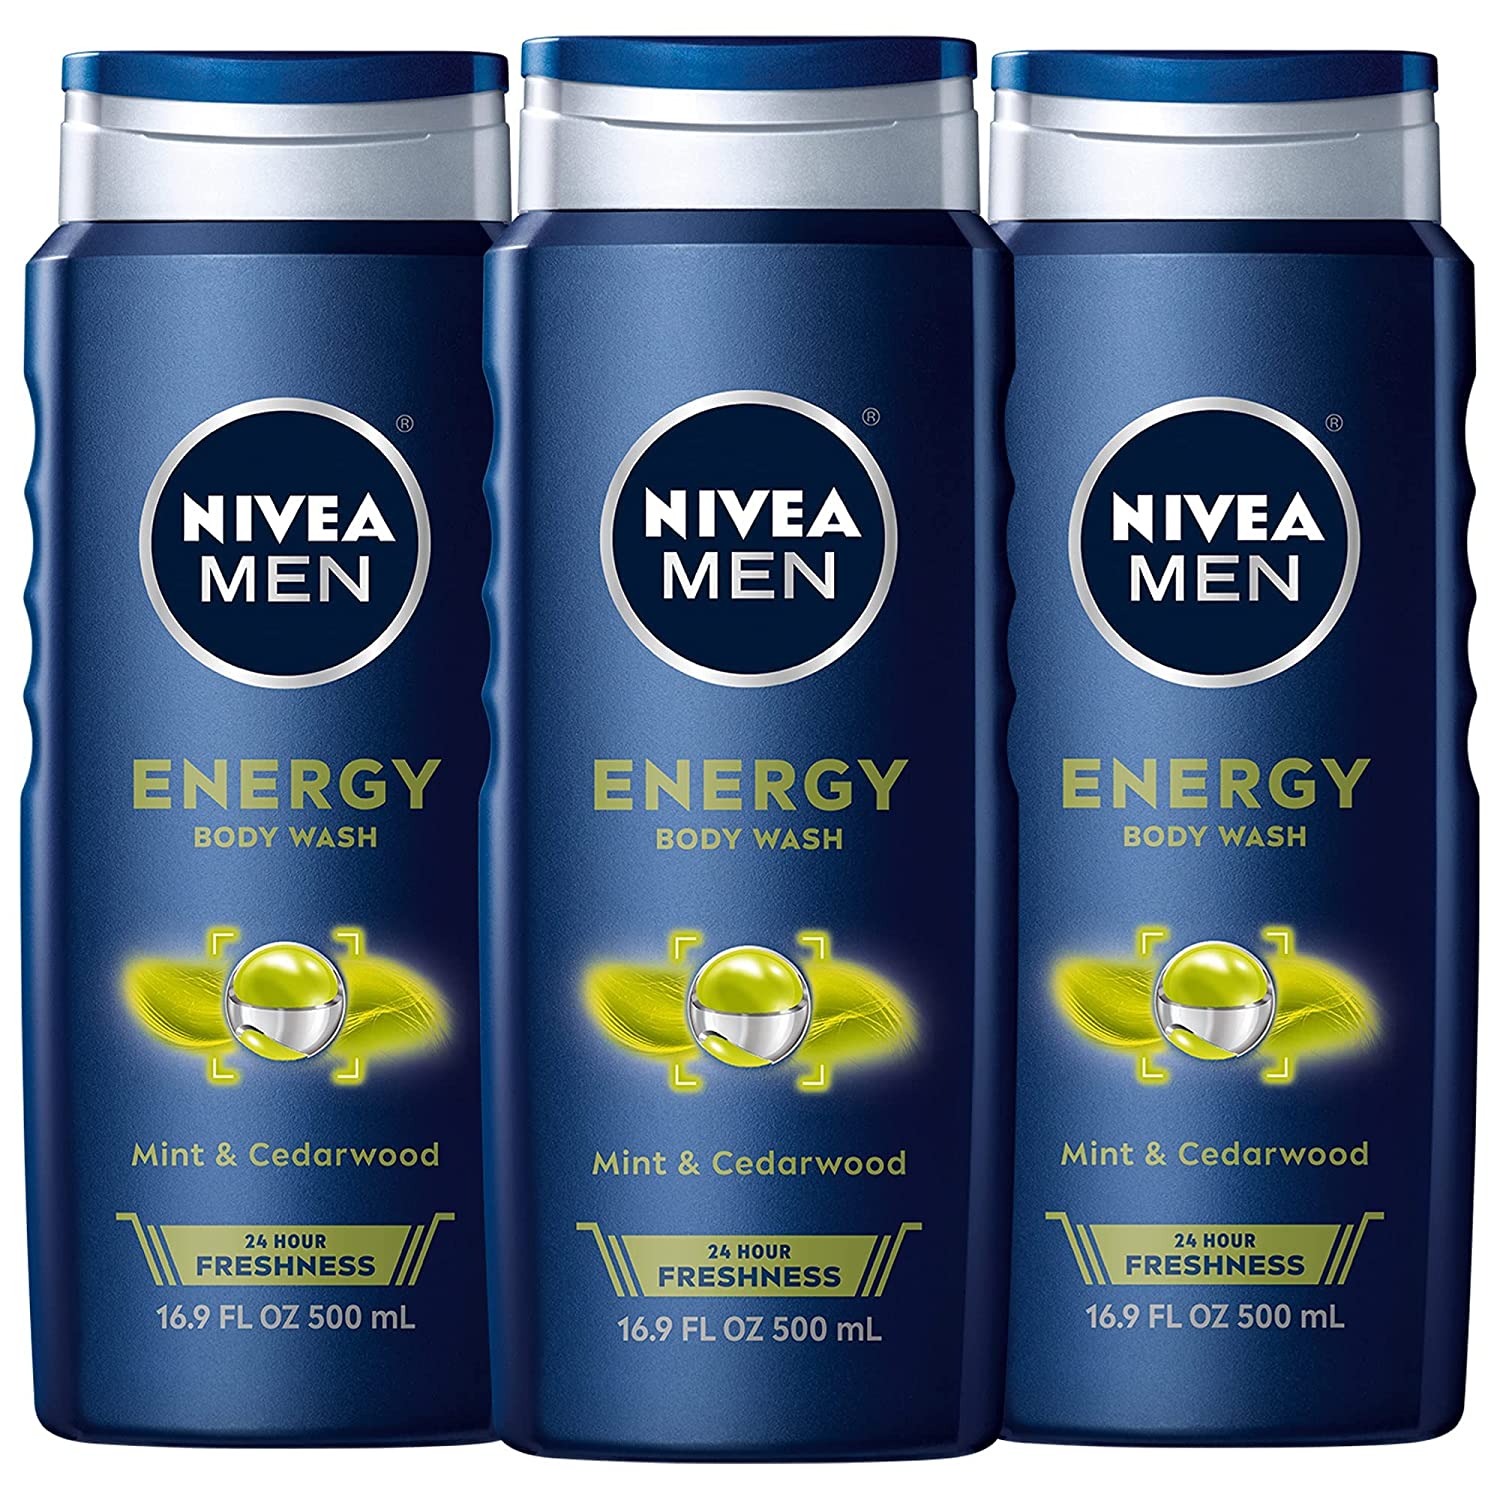 3-Pack 16.9-Oz Nivea Men Energy Body Wash w/ Mint Extract $6.25 w/ S&S + Free Shipping w/ Prime or Orders $25+